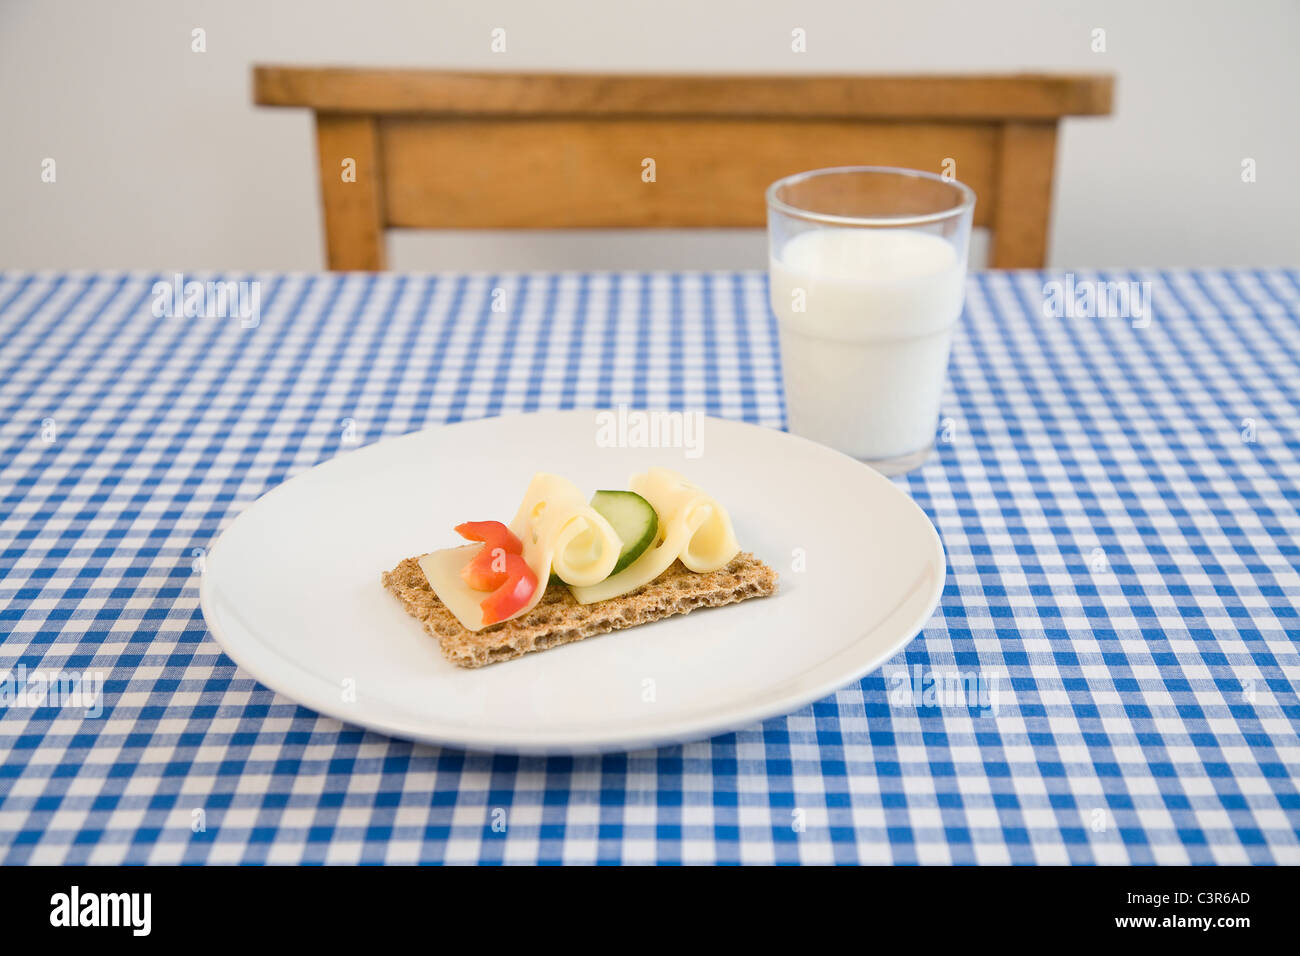 Crisp bread with cheese, glass of milk Stock Photo